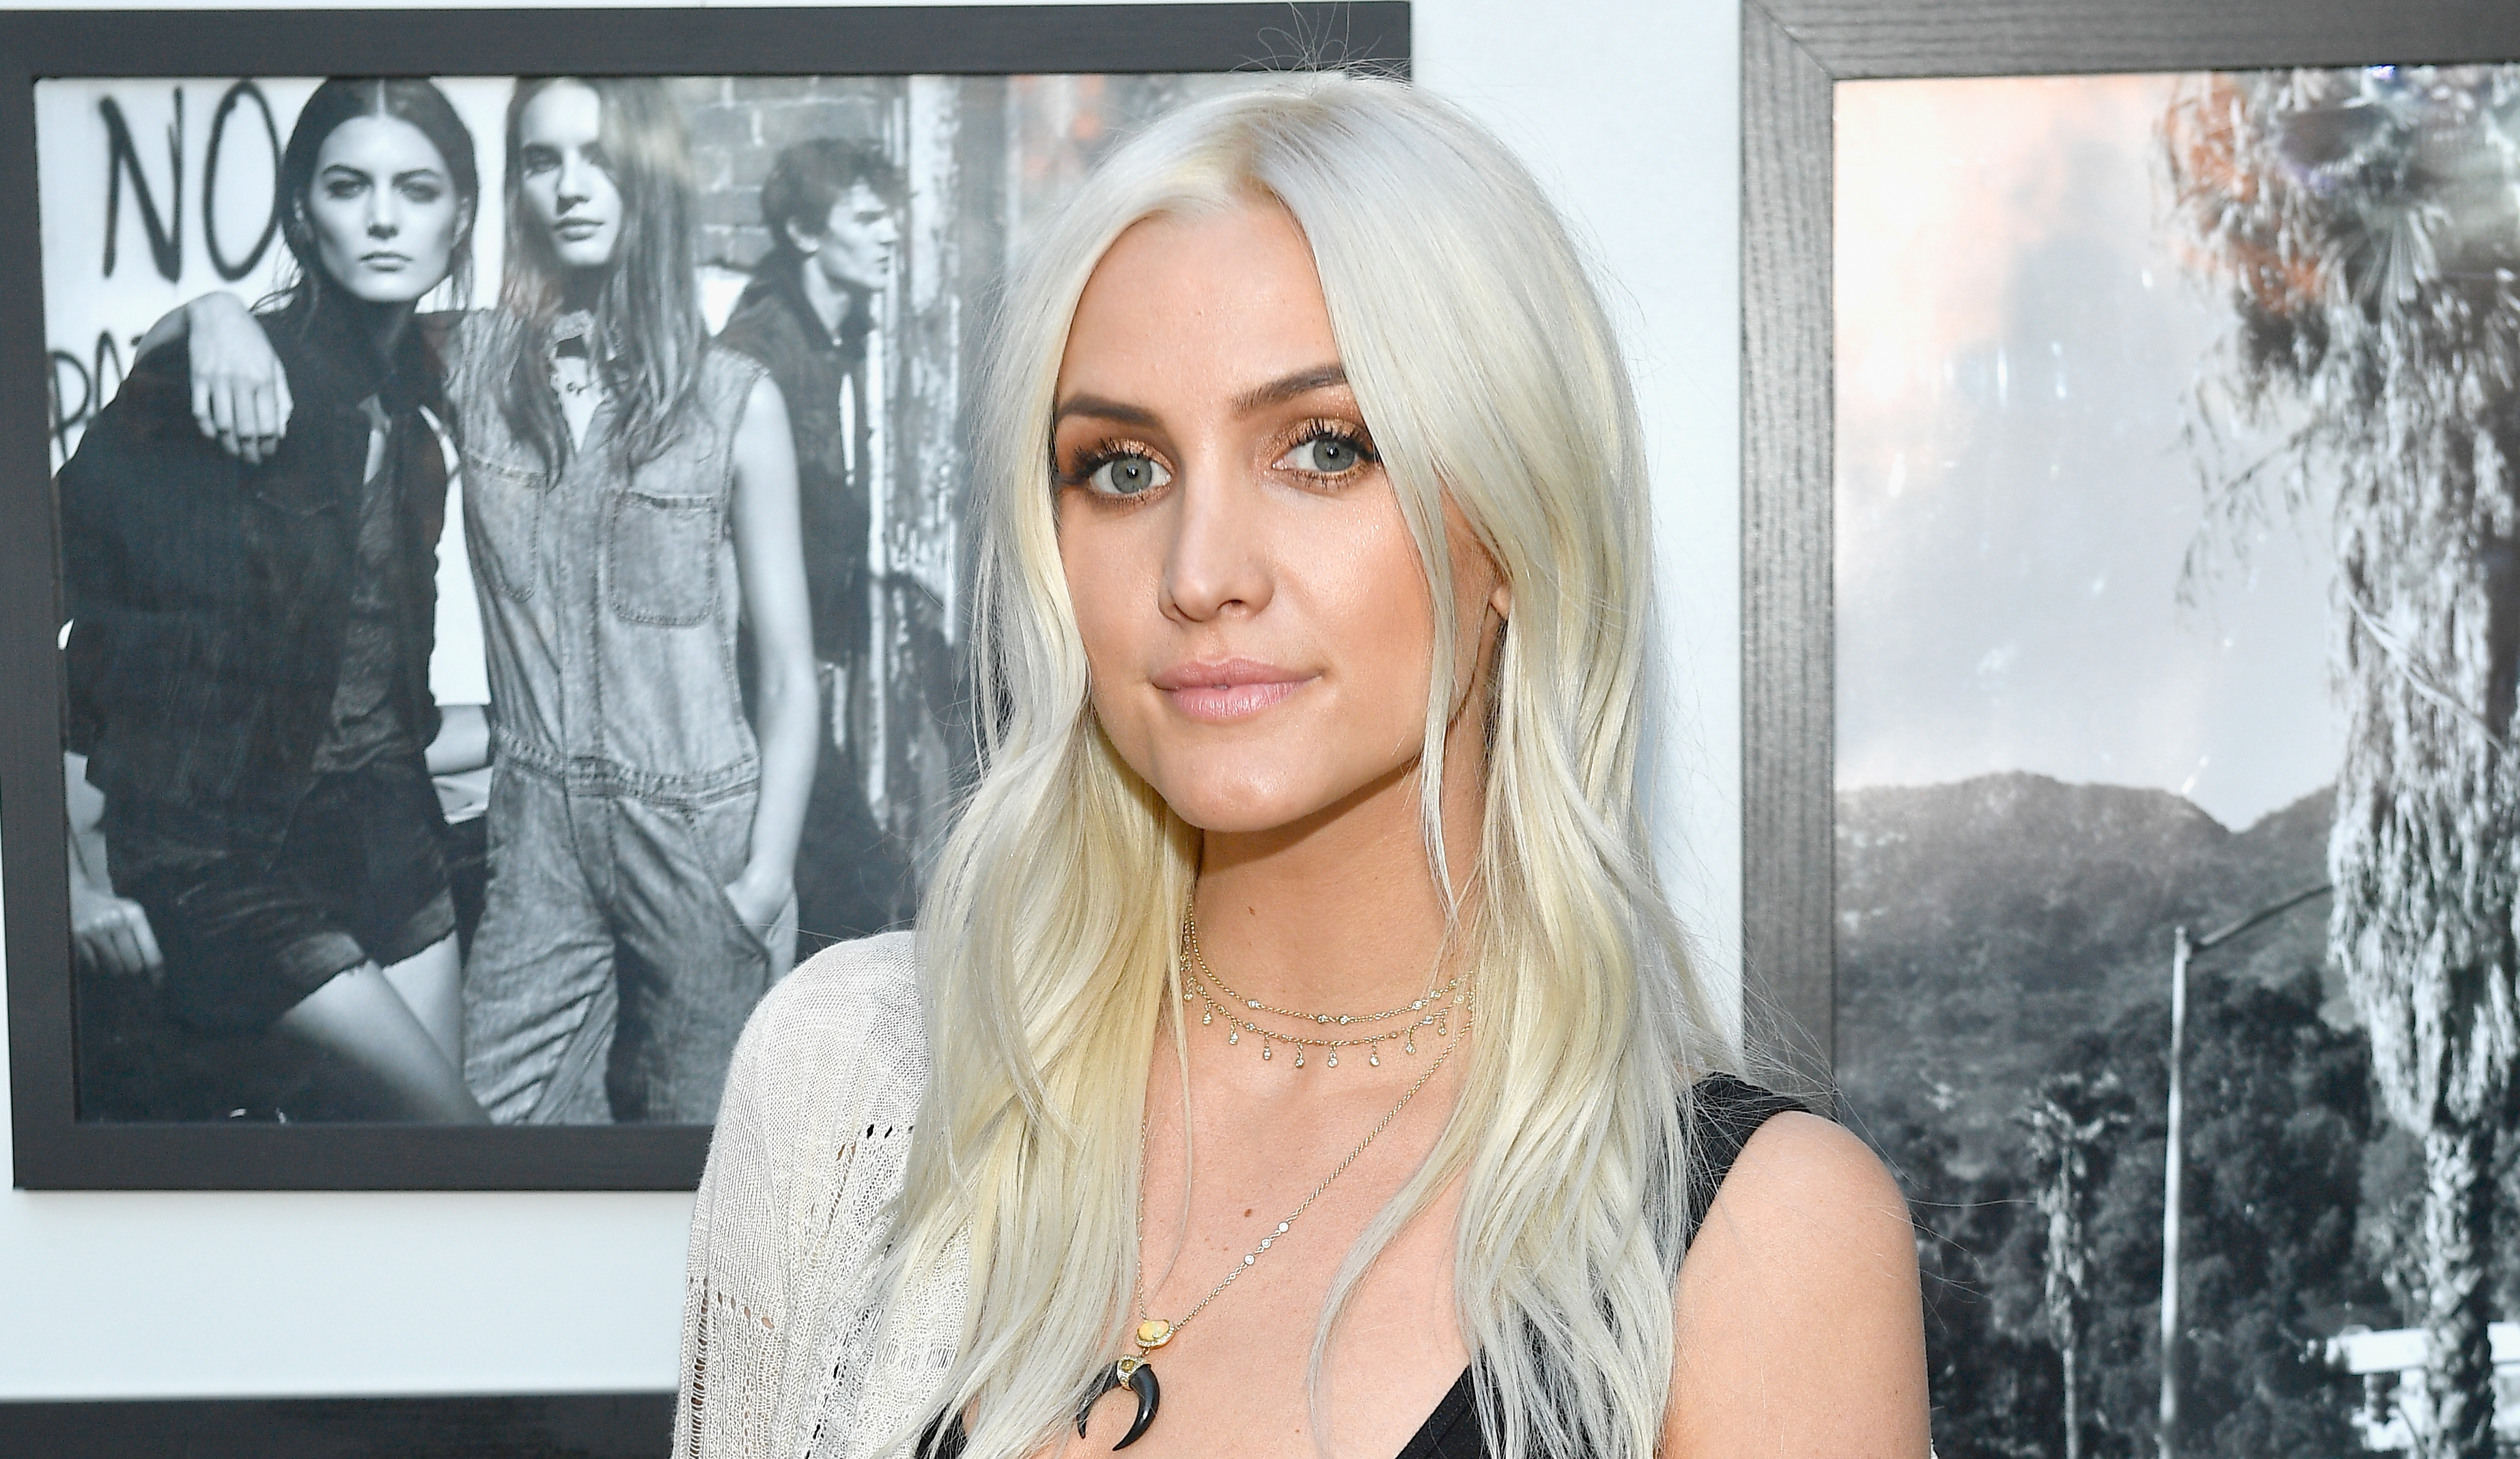 Ashlee Simpson Tits - Did Ashlee Simpson Get More Plastic Surgery? Experts Say Yes!